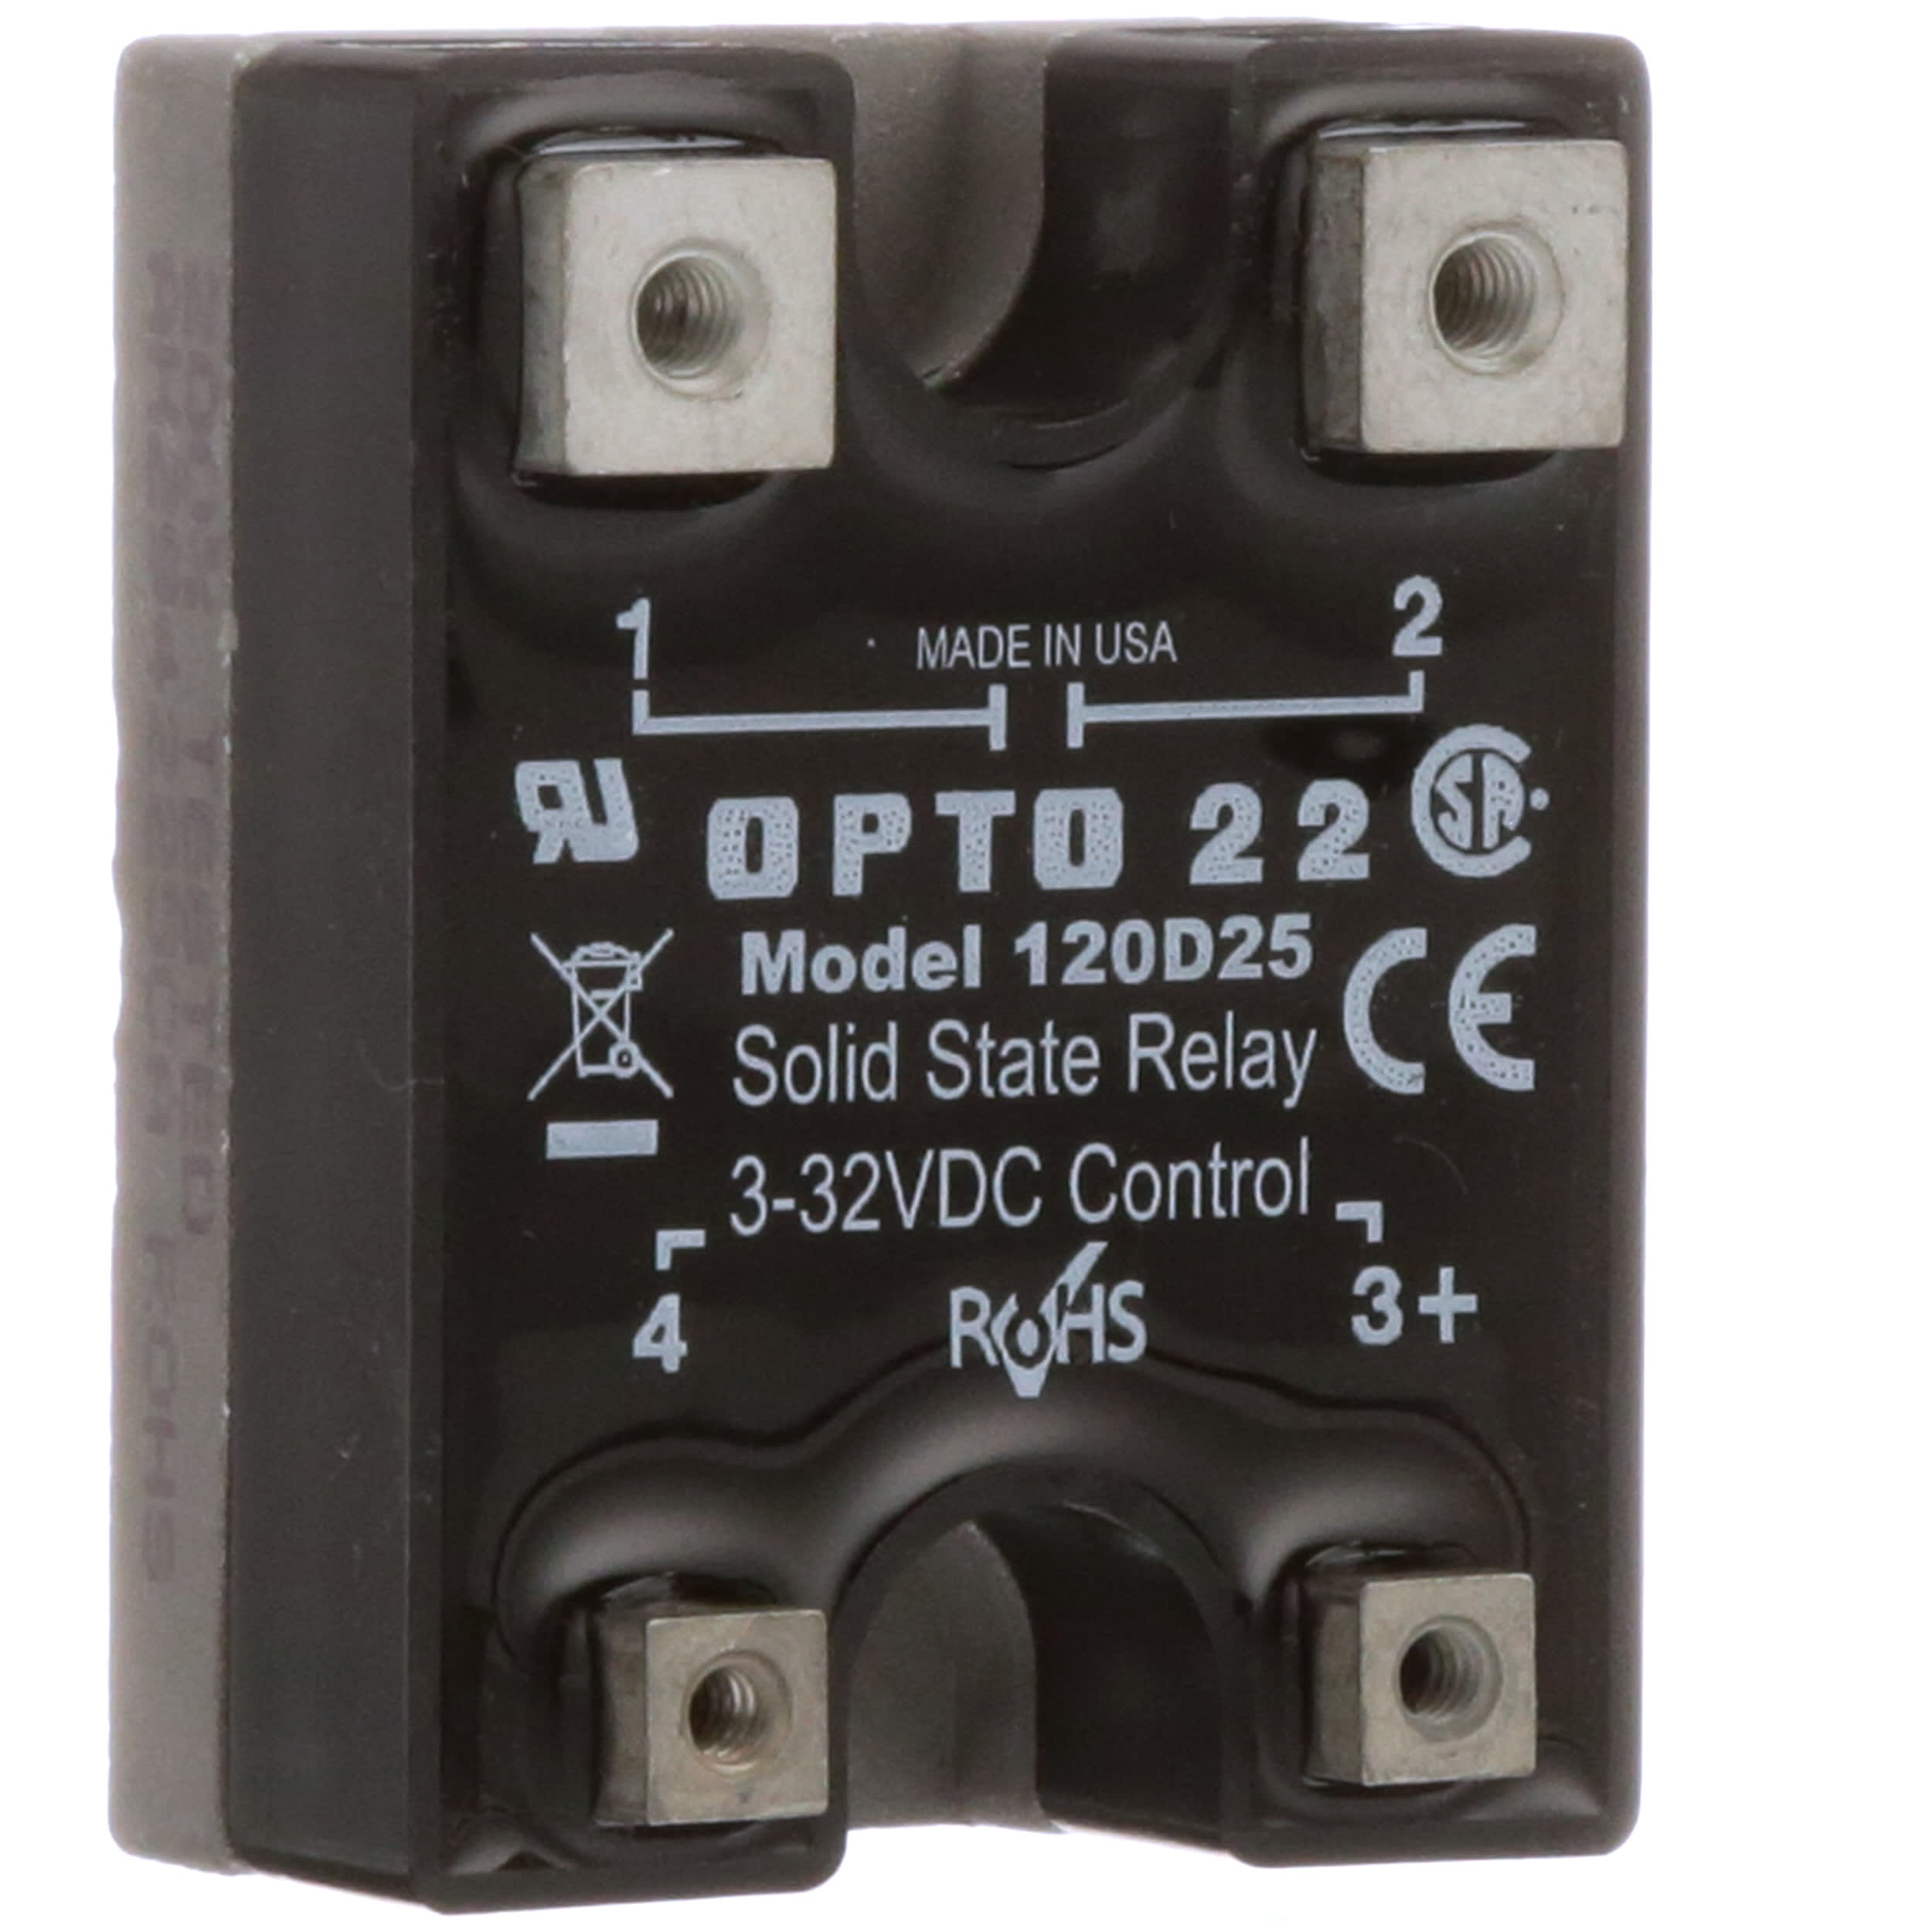 Opto 22 120D25 DC Control Solid State Relay 120 VAC 25 Amp for sale online 